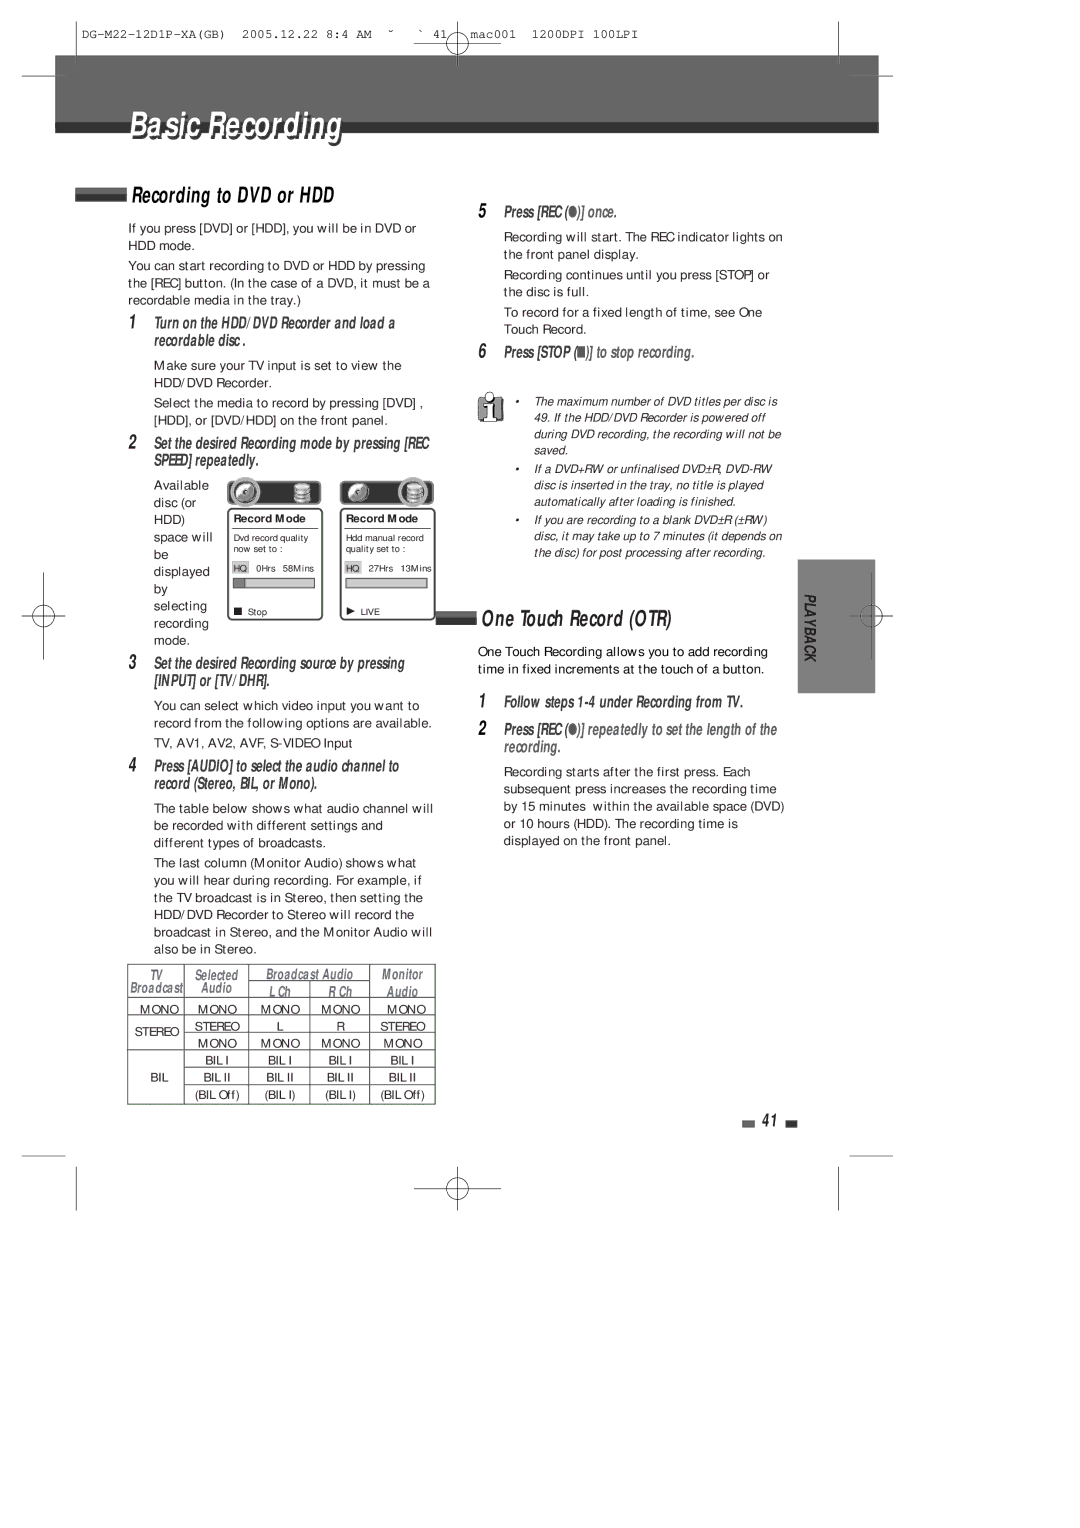 Daewoo DHR-8100P user manual Basicic Recordingi, Recording to DVD or HDD, One Touch Record OTR 